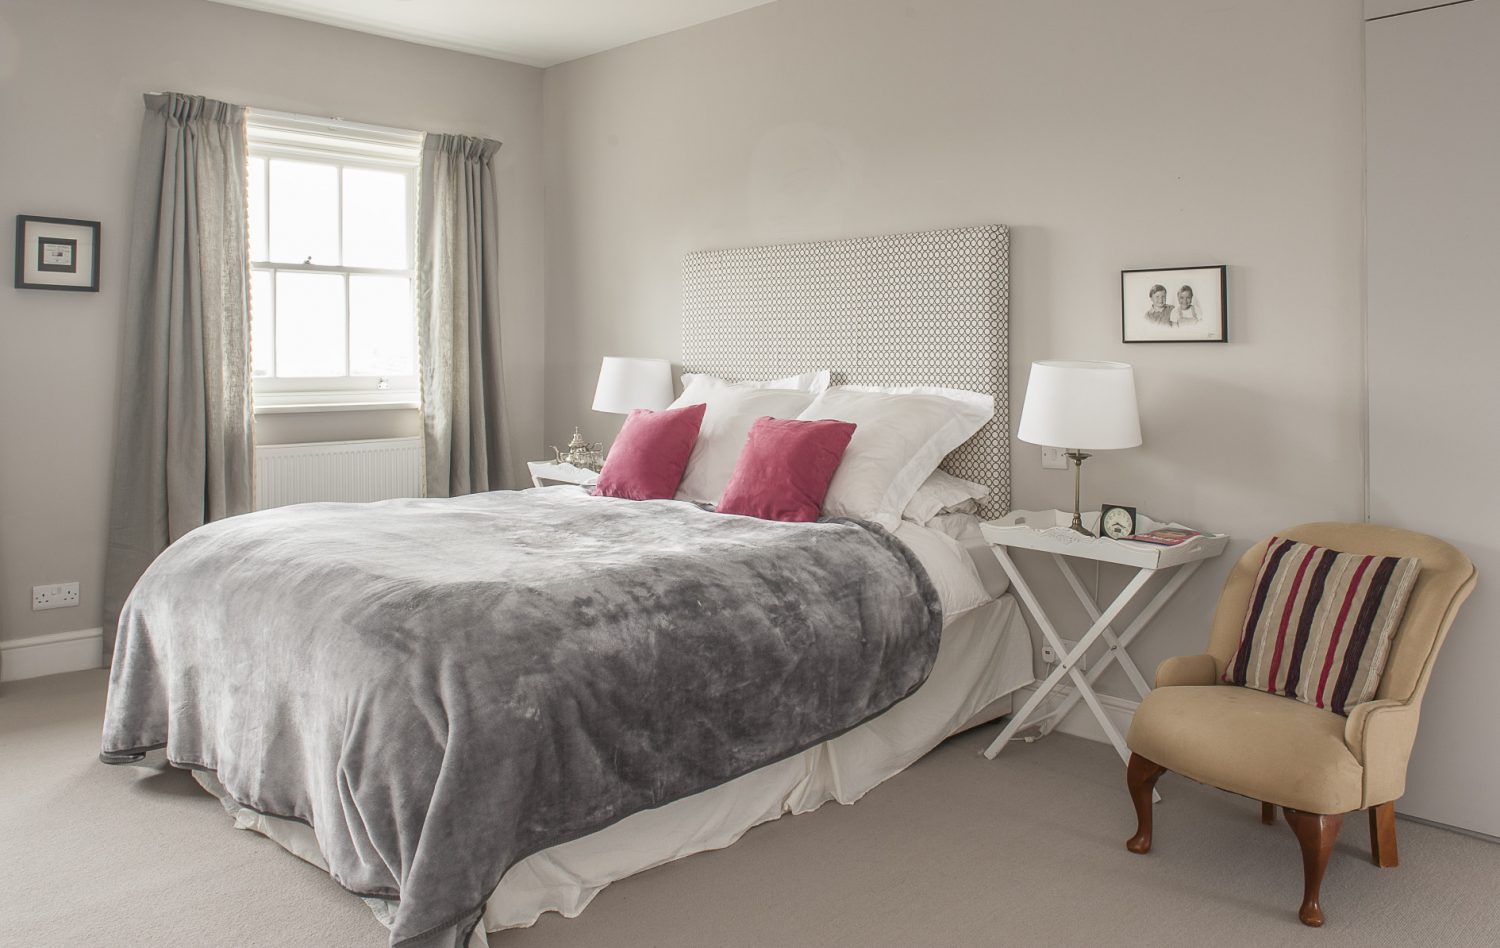 Philippa’s renovation has increased the number of bedrooms at The Grange from four to six. The beds in the welcoming guest rooms are dressed with cosy velvet and quilted throws and plump feather pillows